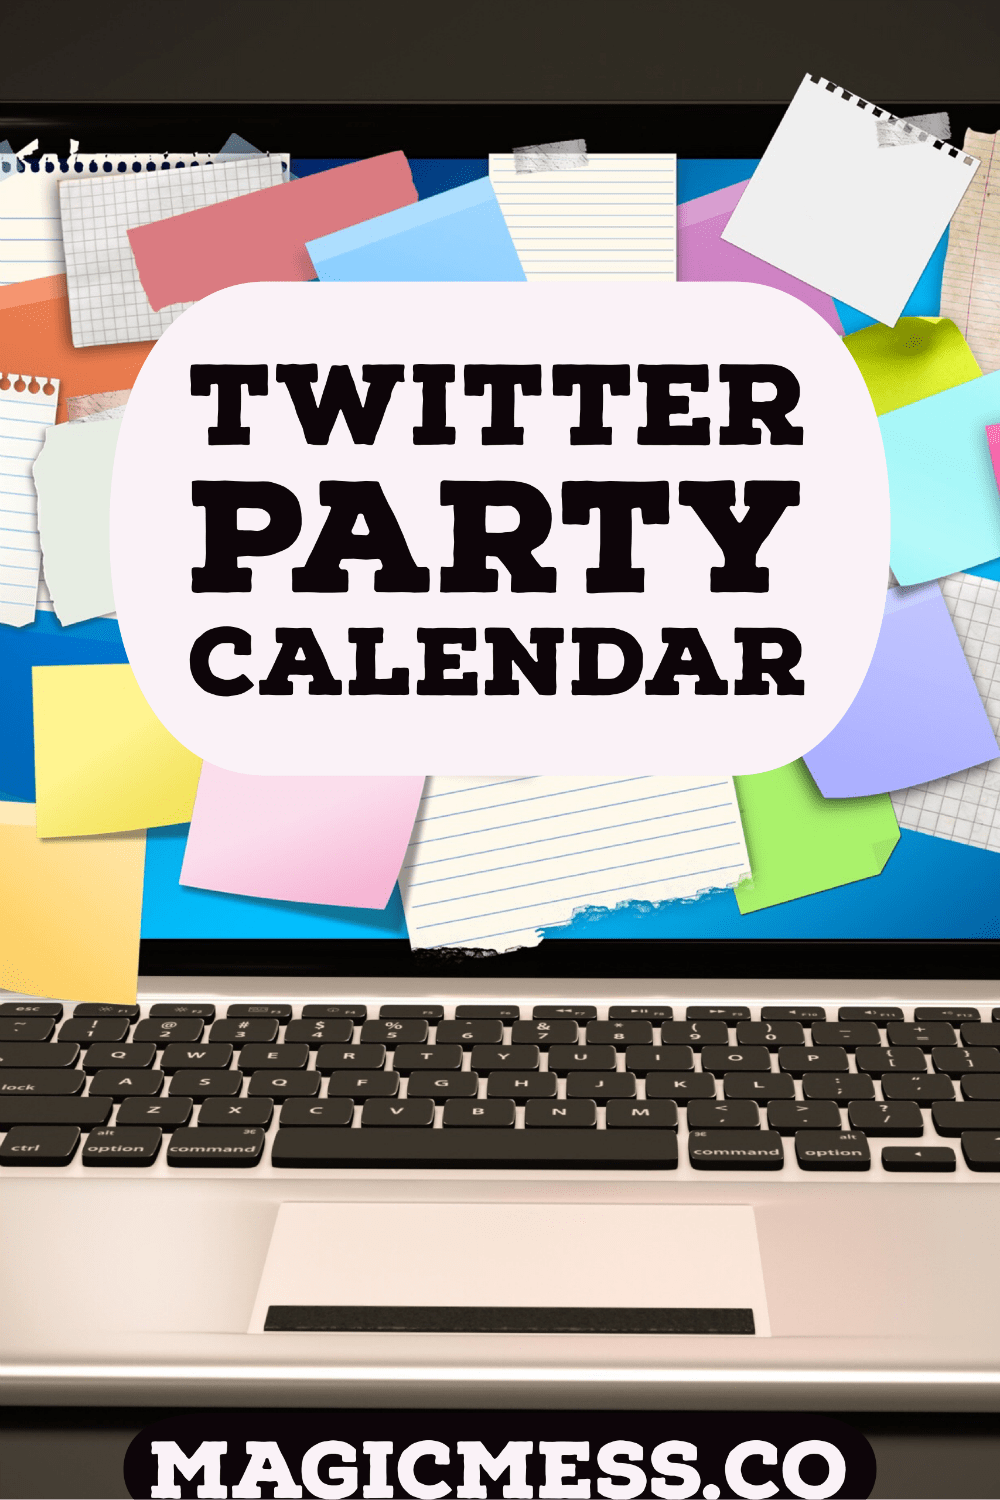 twitter party calender